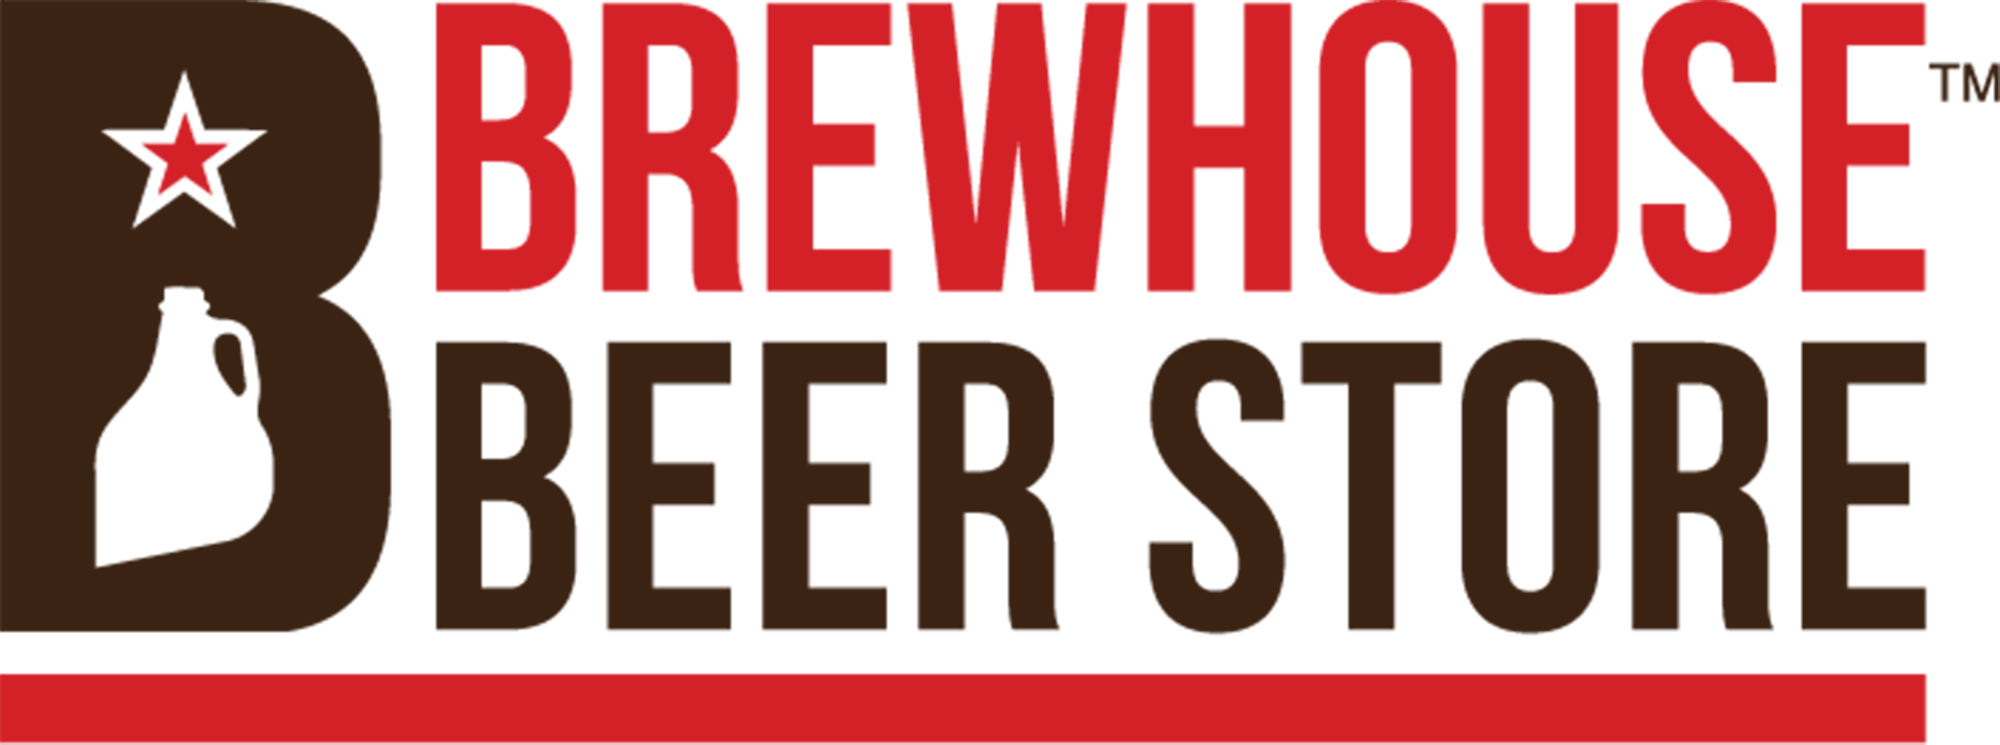 Beer Store - Red and Brown